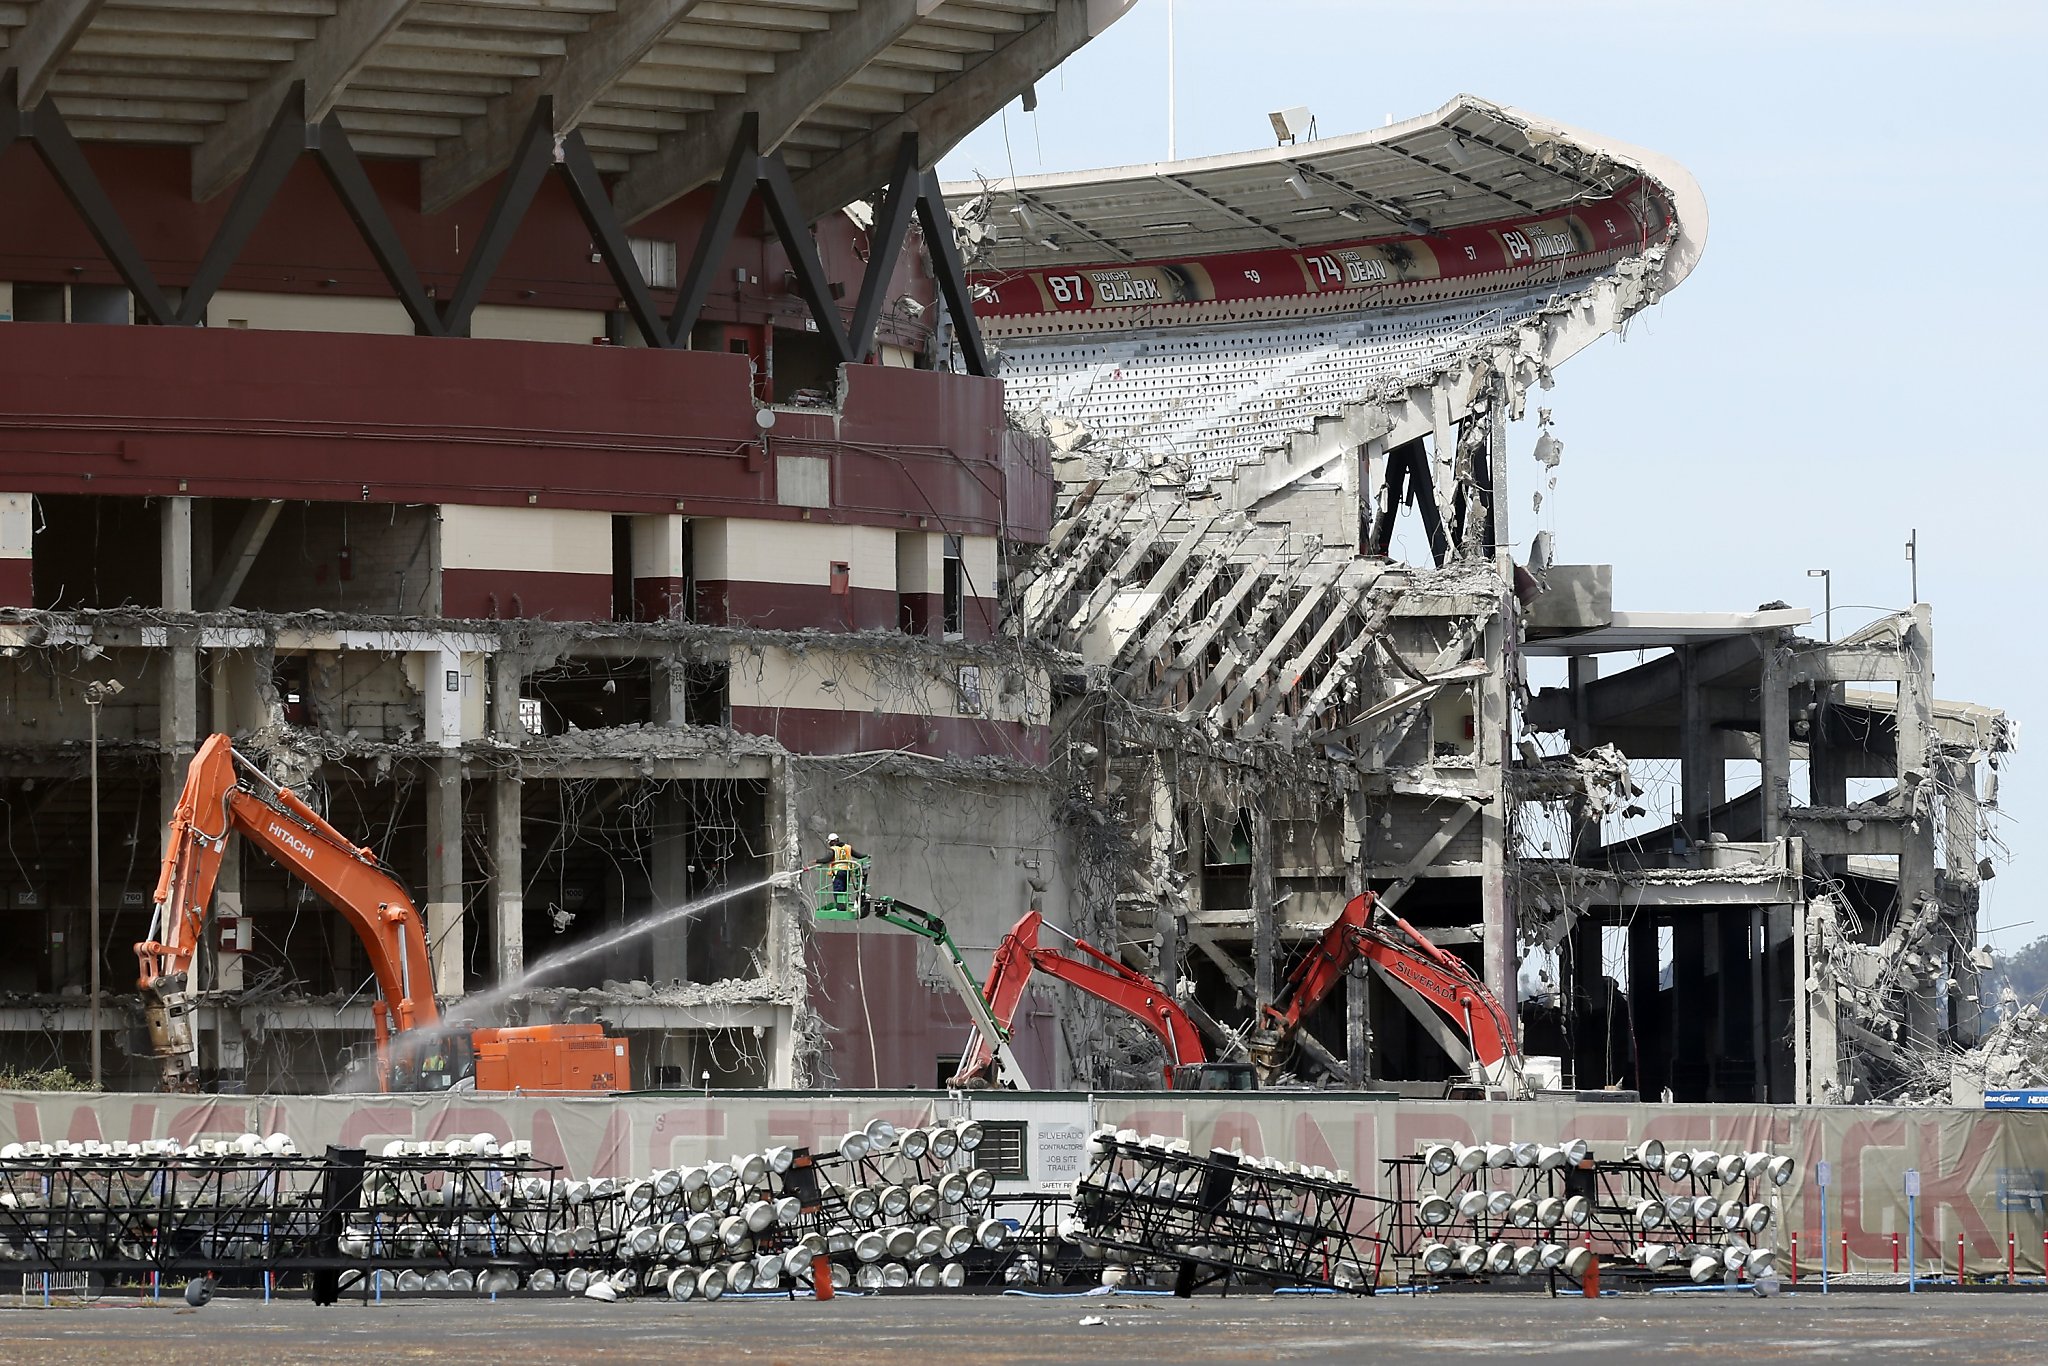 Candlestick Park will be gone, but memories of stadium live on - SFGate